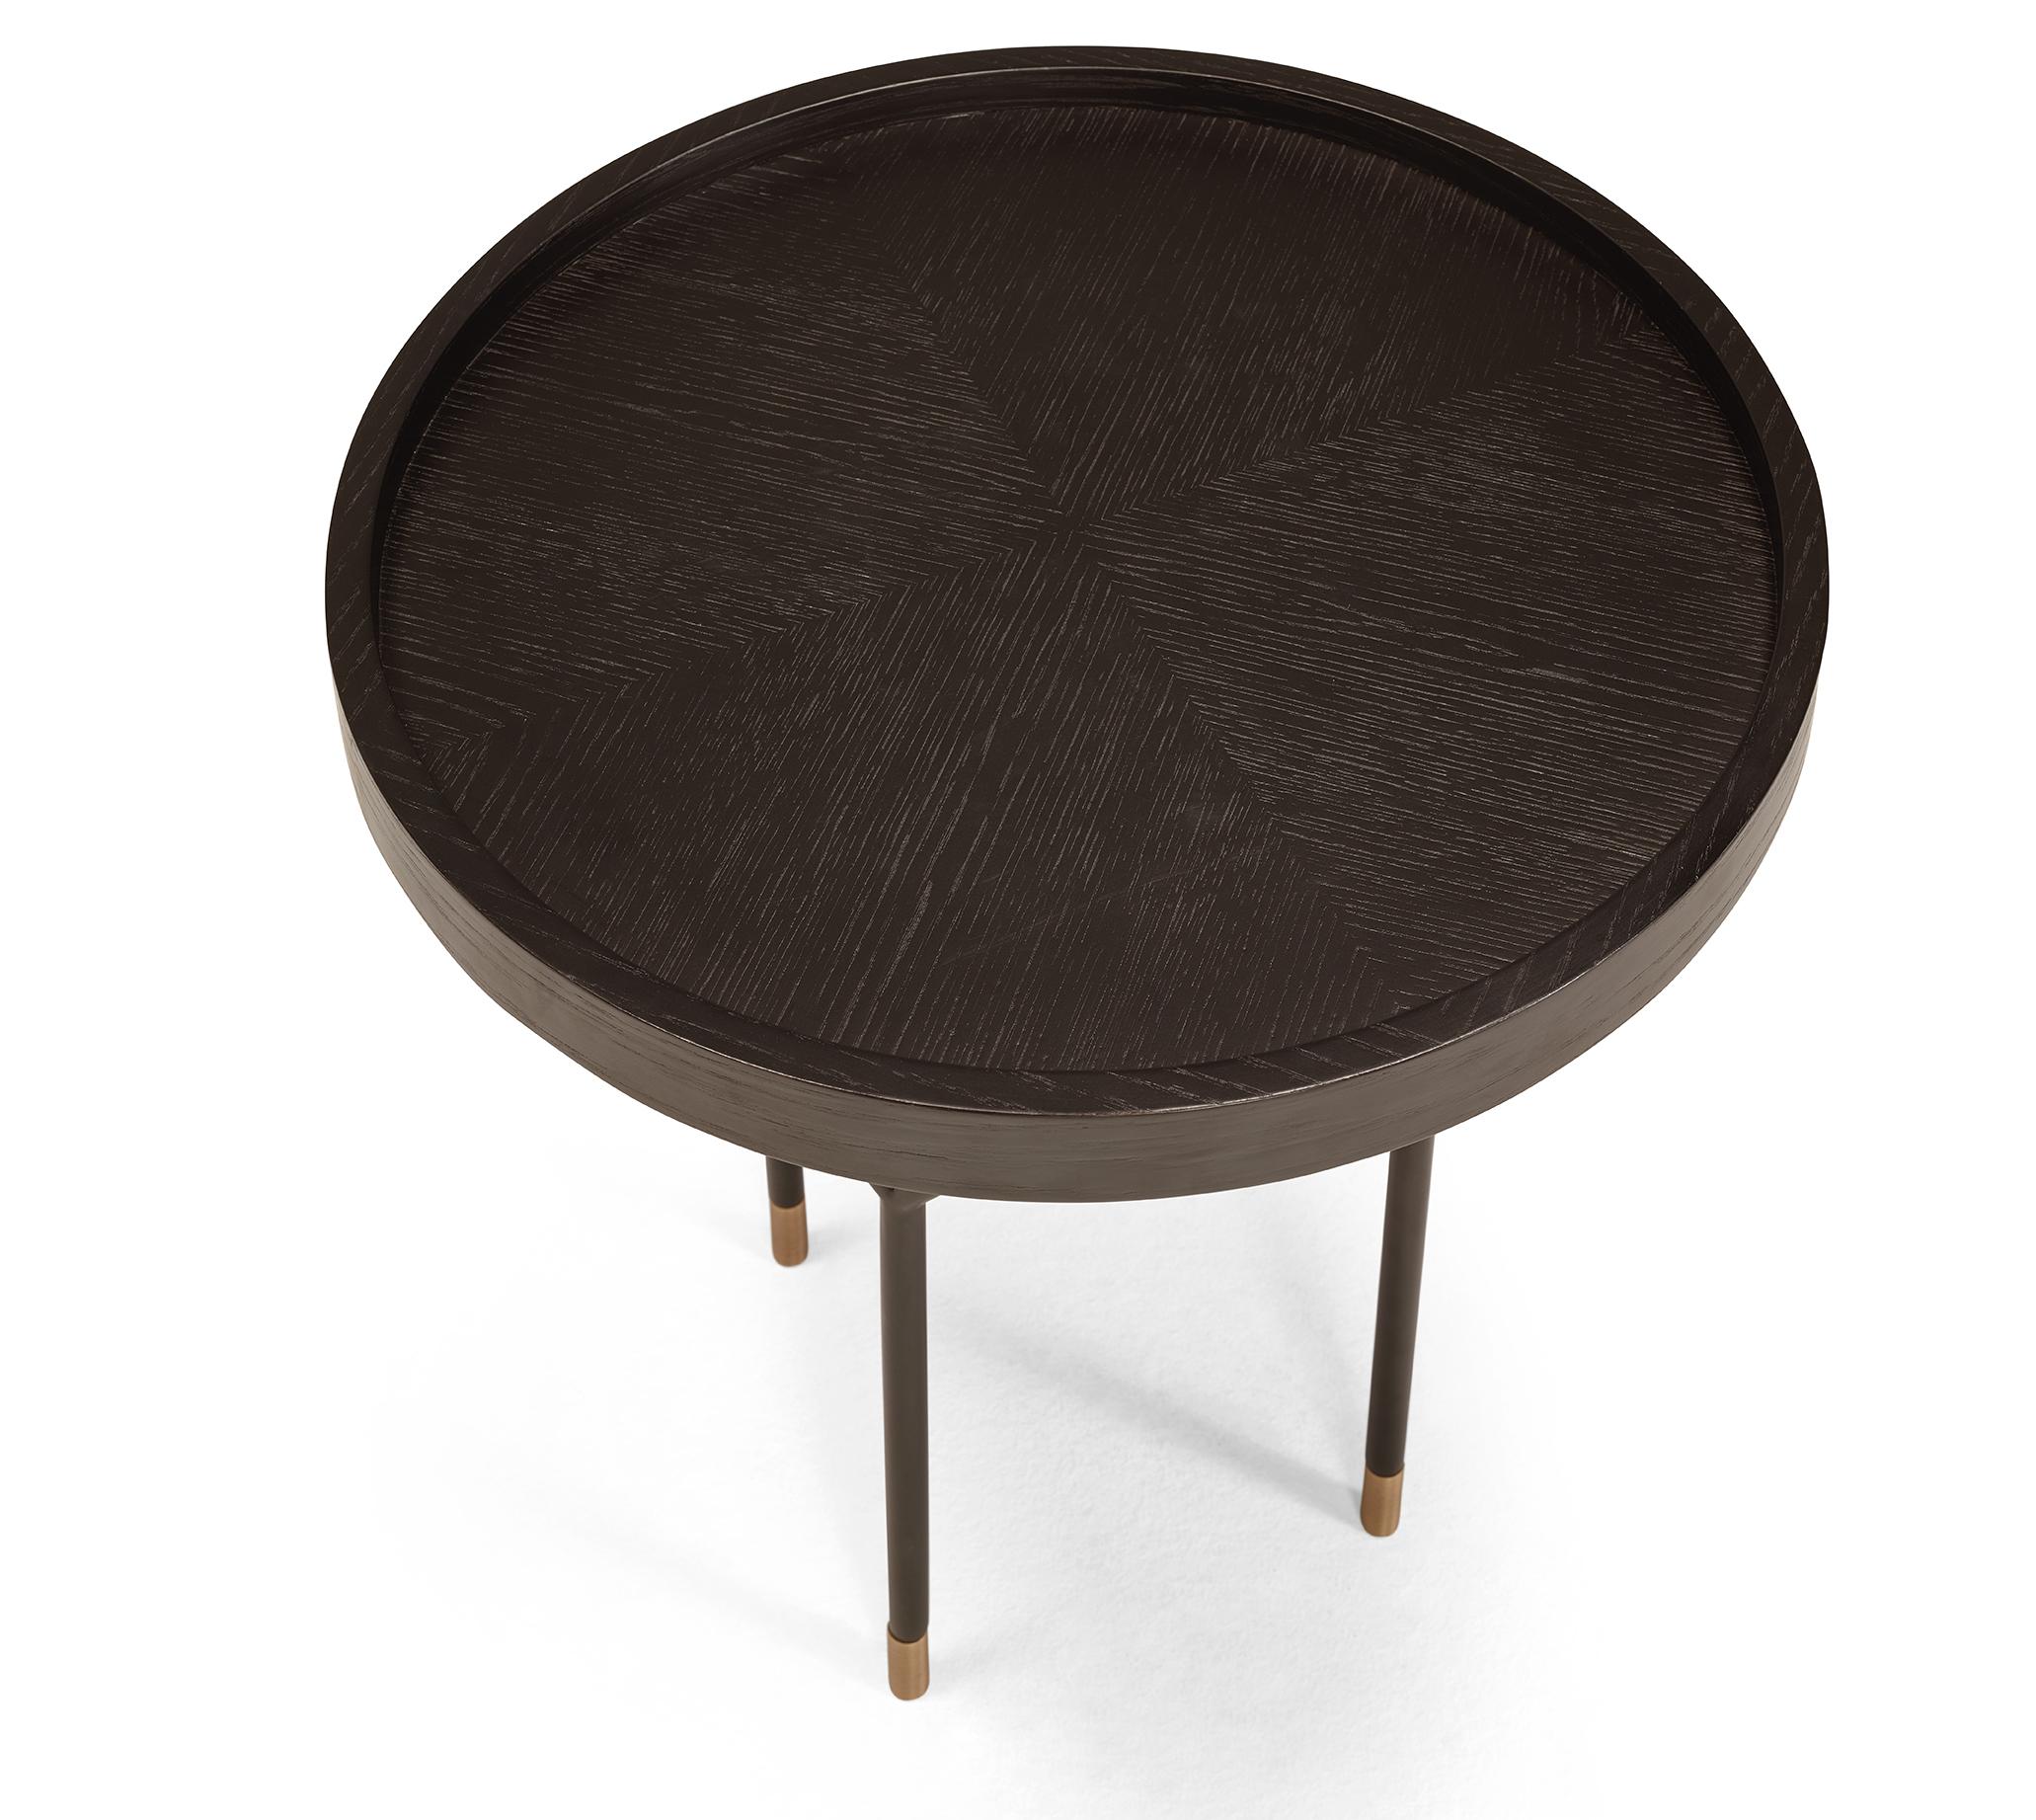 The combination of the round top with the straight-lines legs gives AVA side table a modern design, perfect for comtemporary living styles. The wooden top and metal base combines different finishes, as this model allows to mix and match